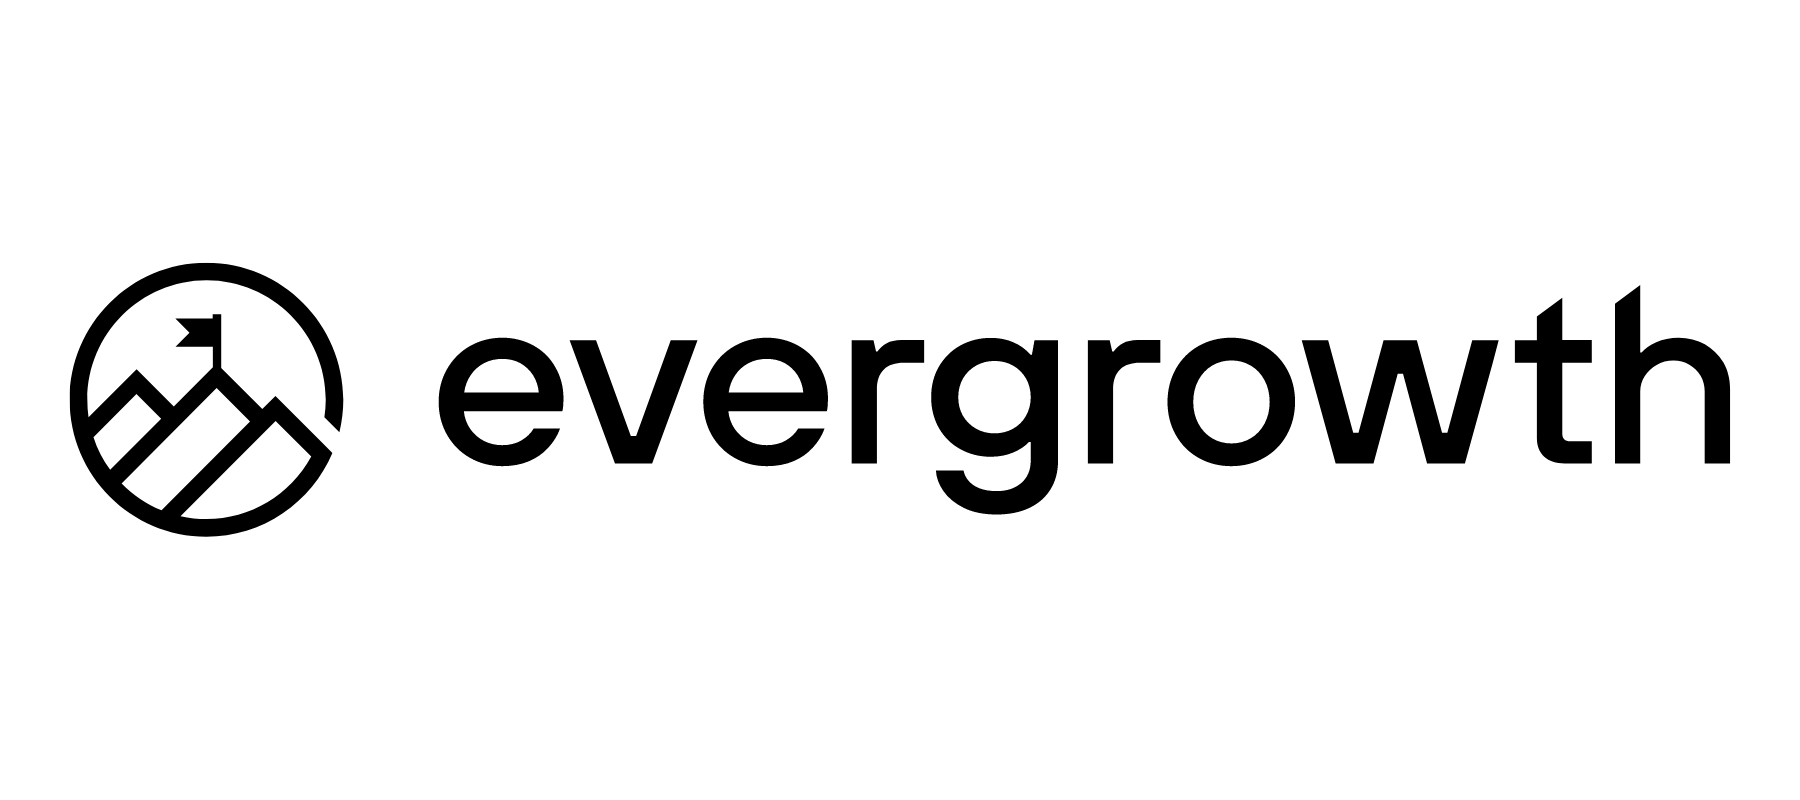 Evergrowth kills its sales consultancy business, raises $2.2m to claim the account-based selling software category